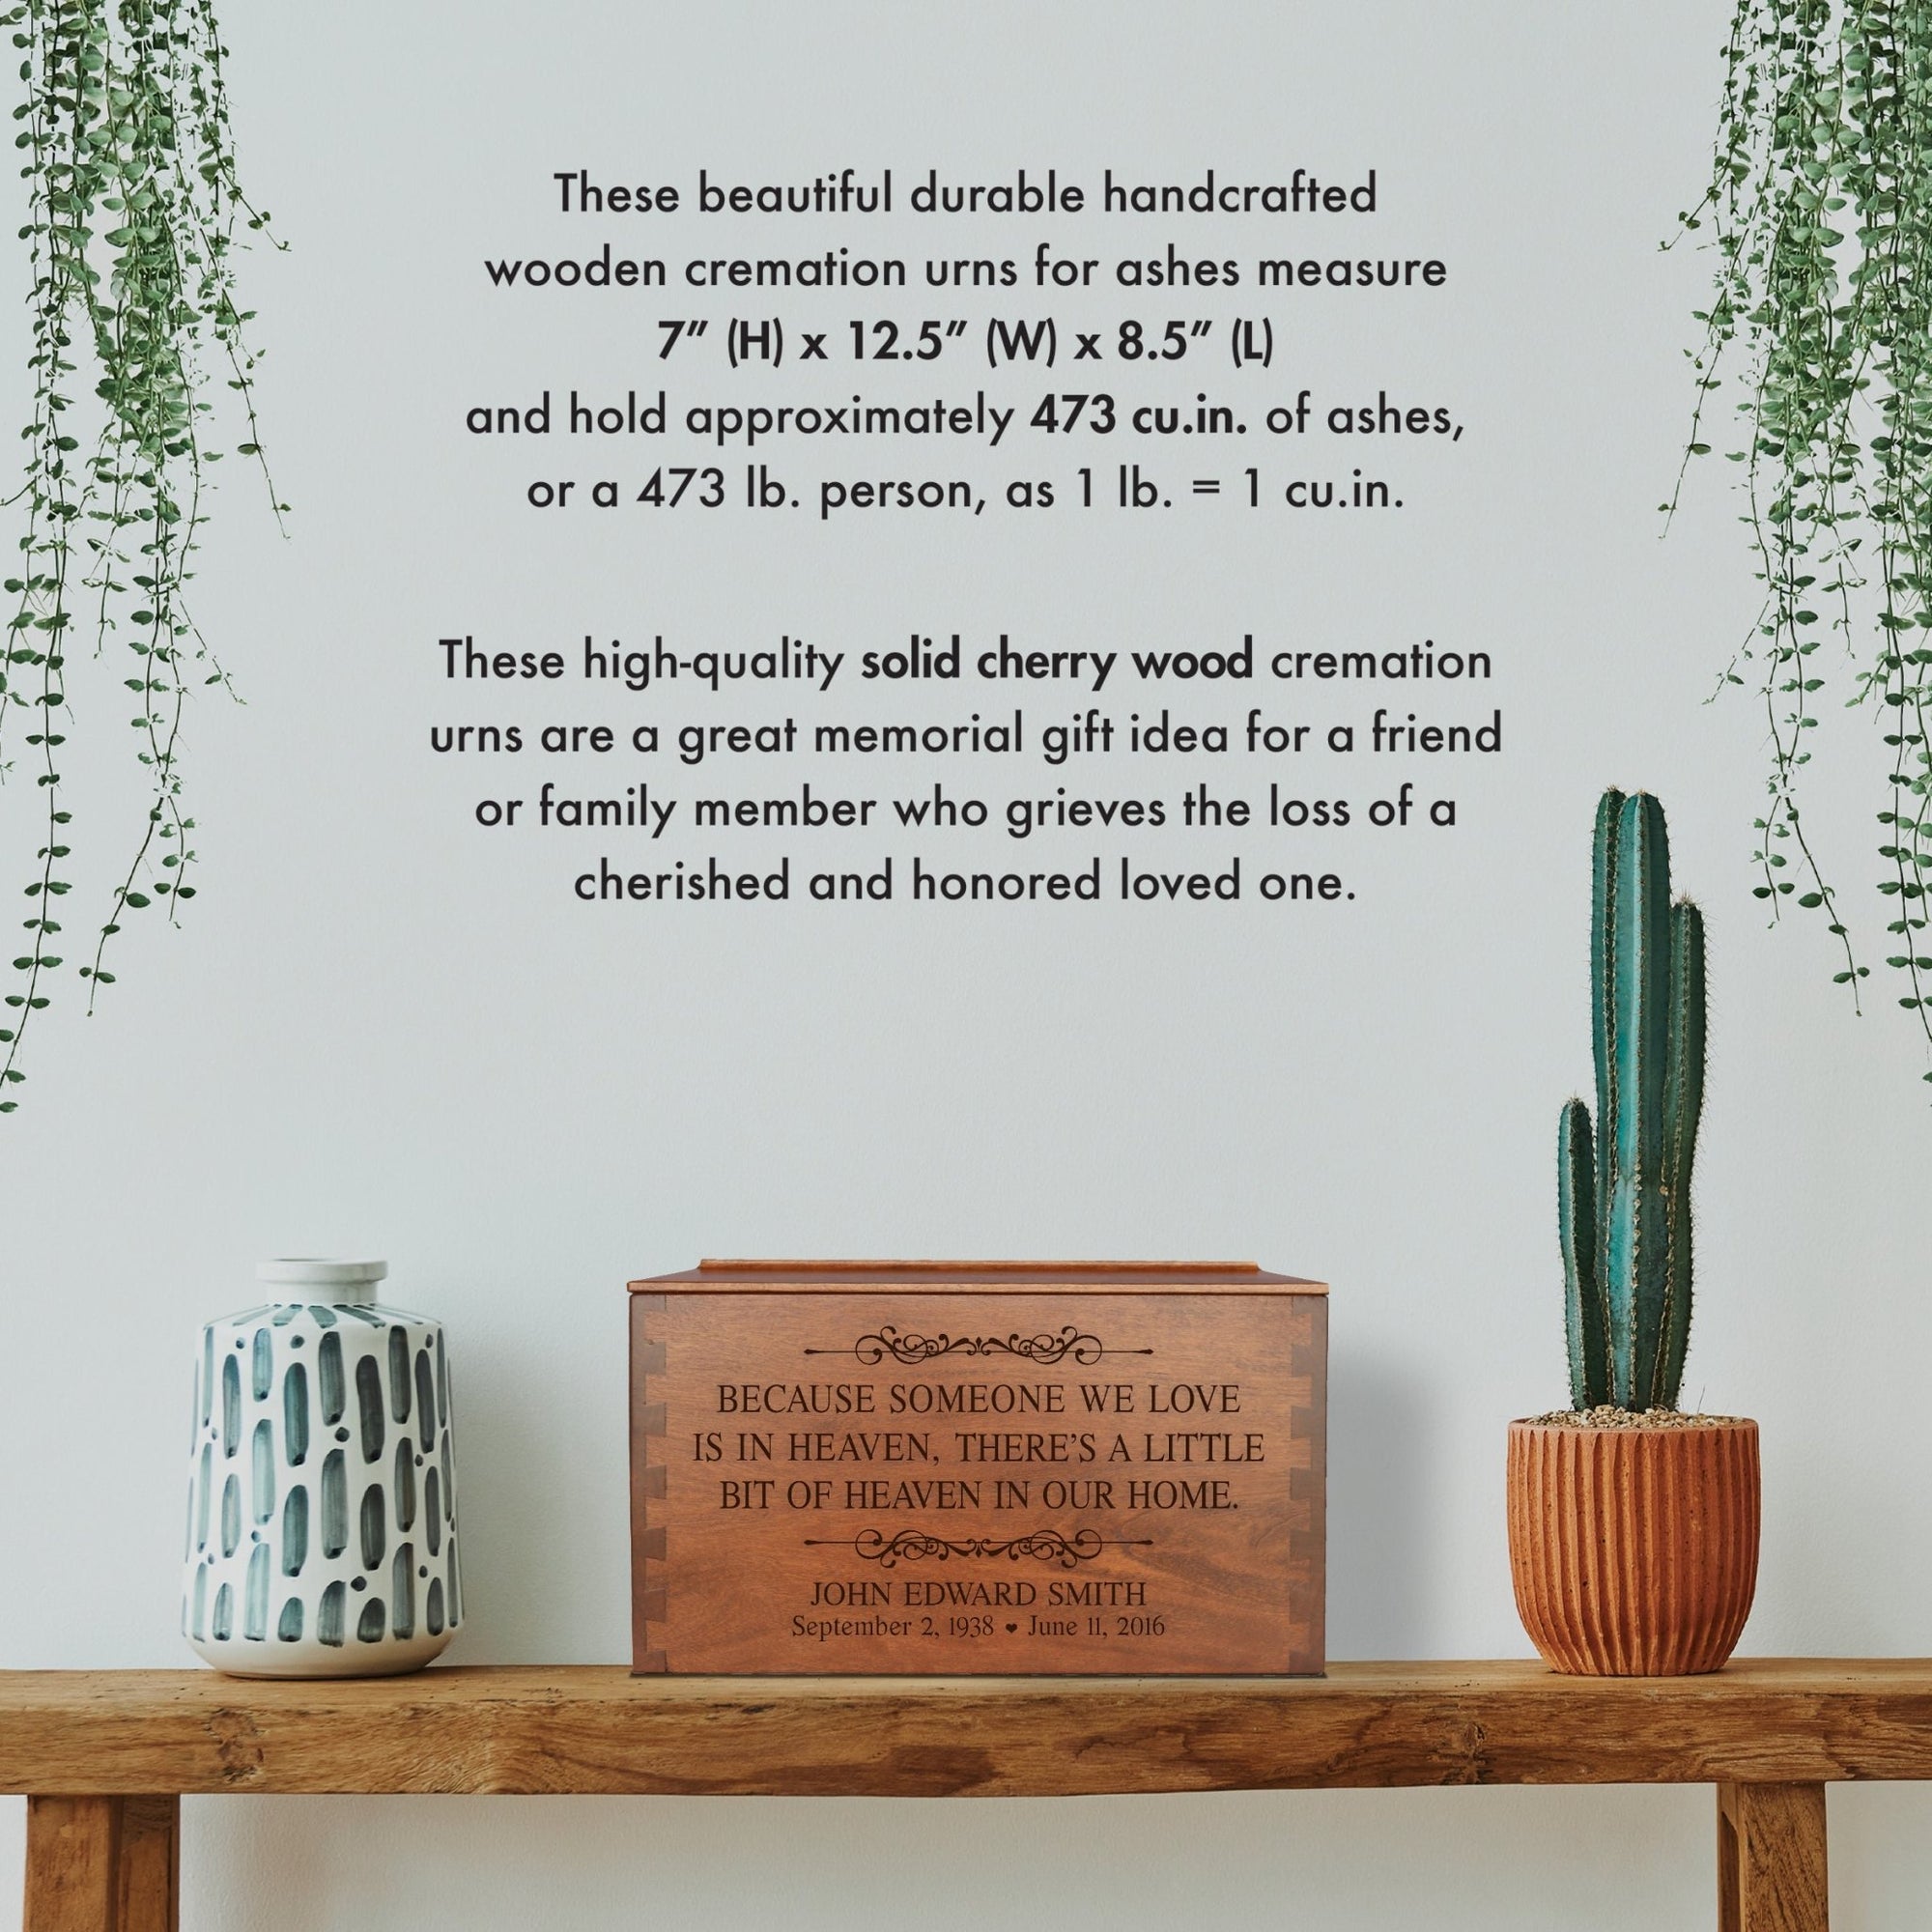 Personalized Memorial Dovetail Cremation Urn For Human Ashes